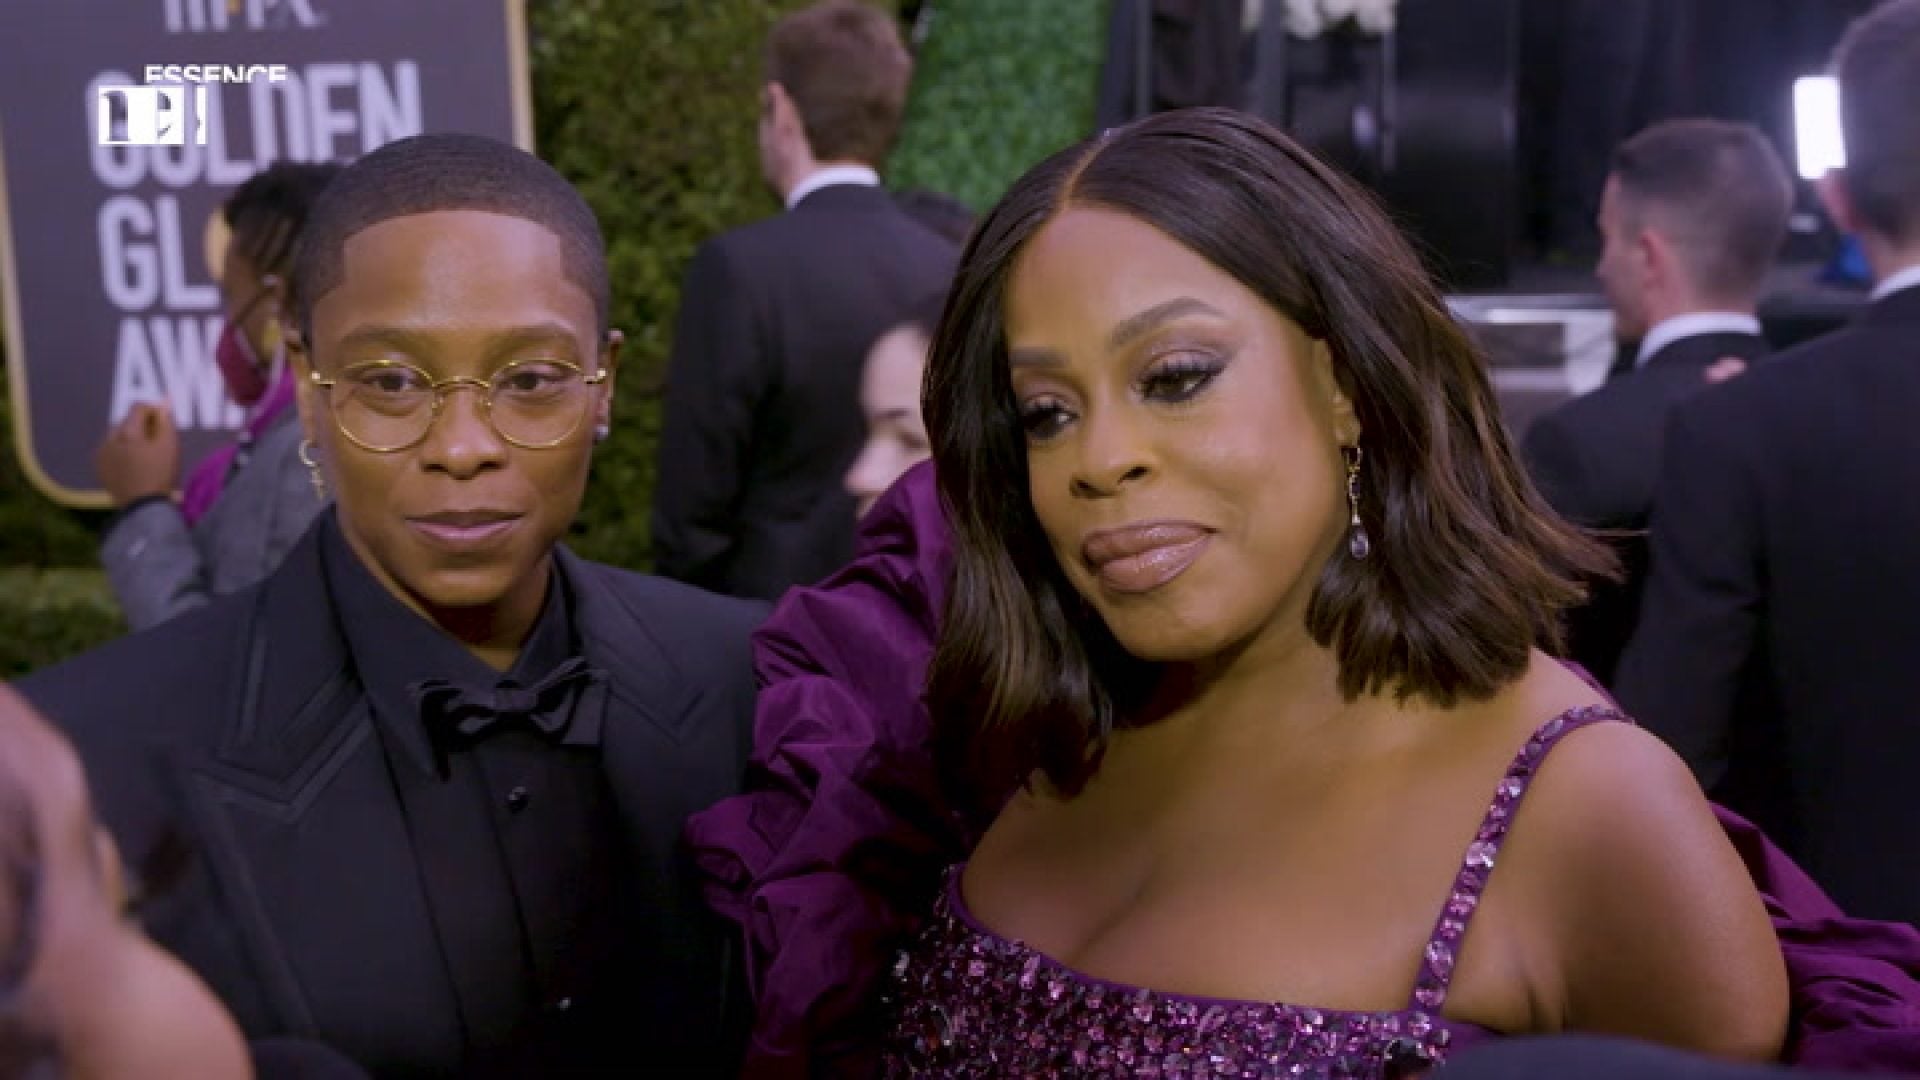 WATCH: Niecy Nash's Mom Gushes Over Her On The Golden Globe Red Carpet